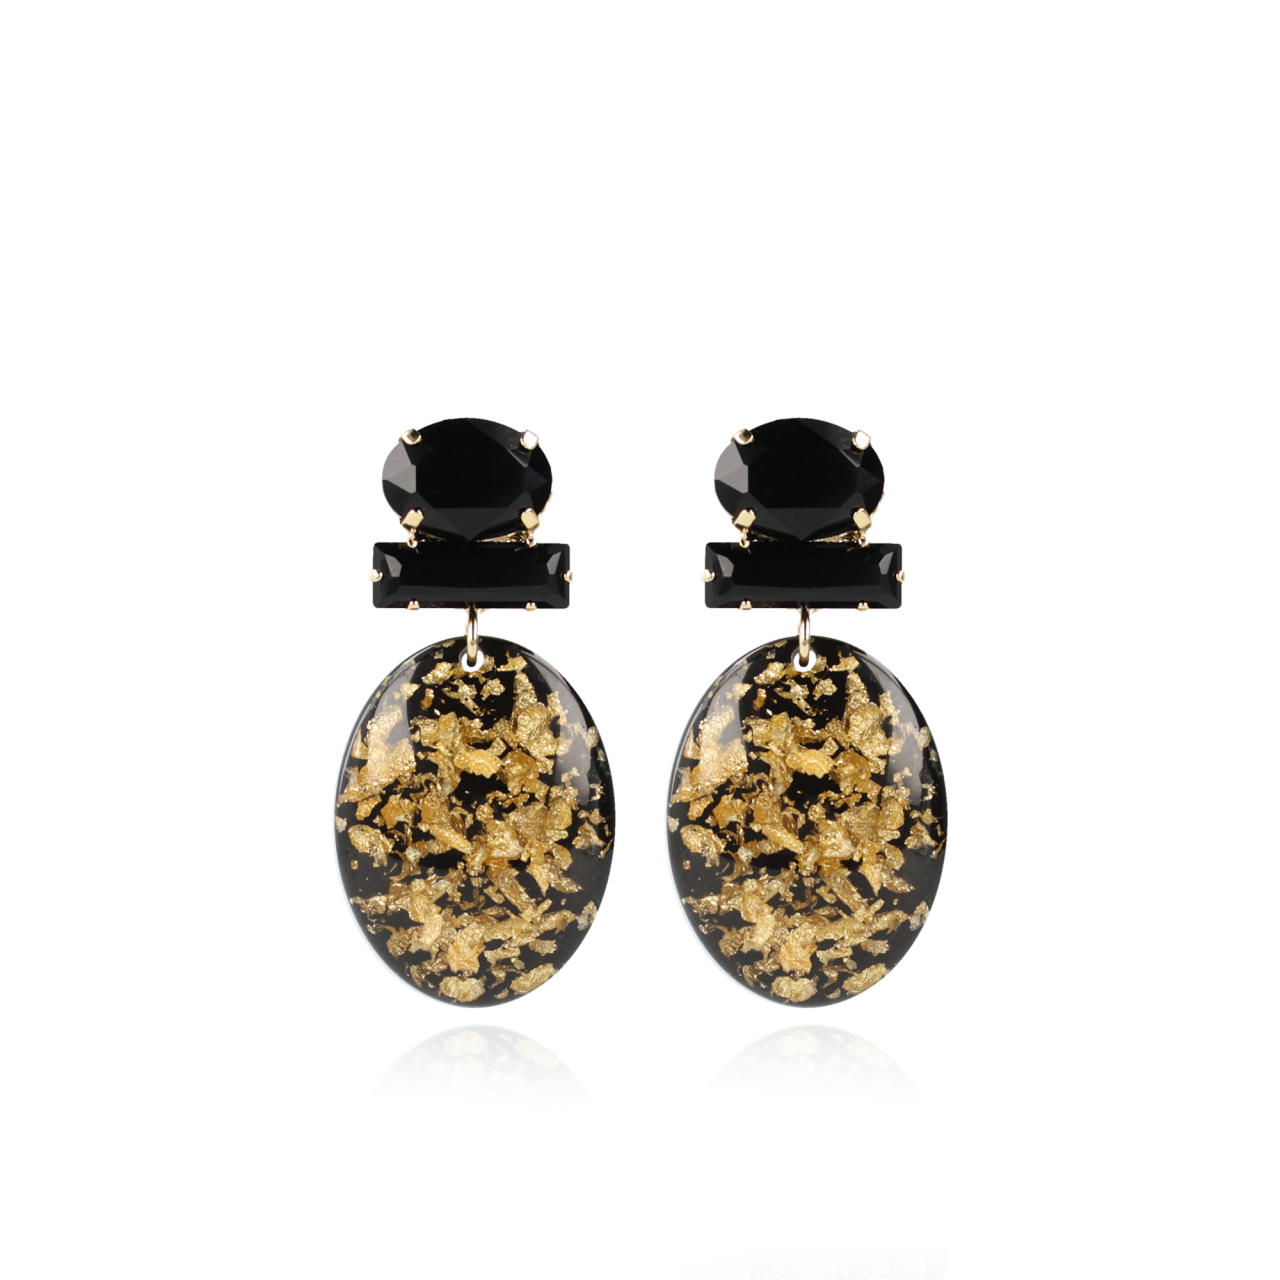  Flakes earrings Sirius oval Strass